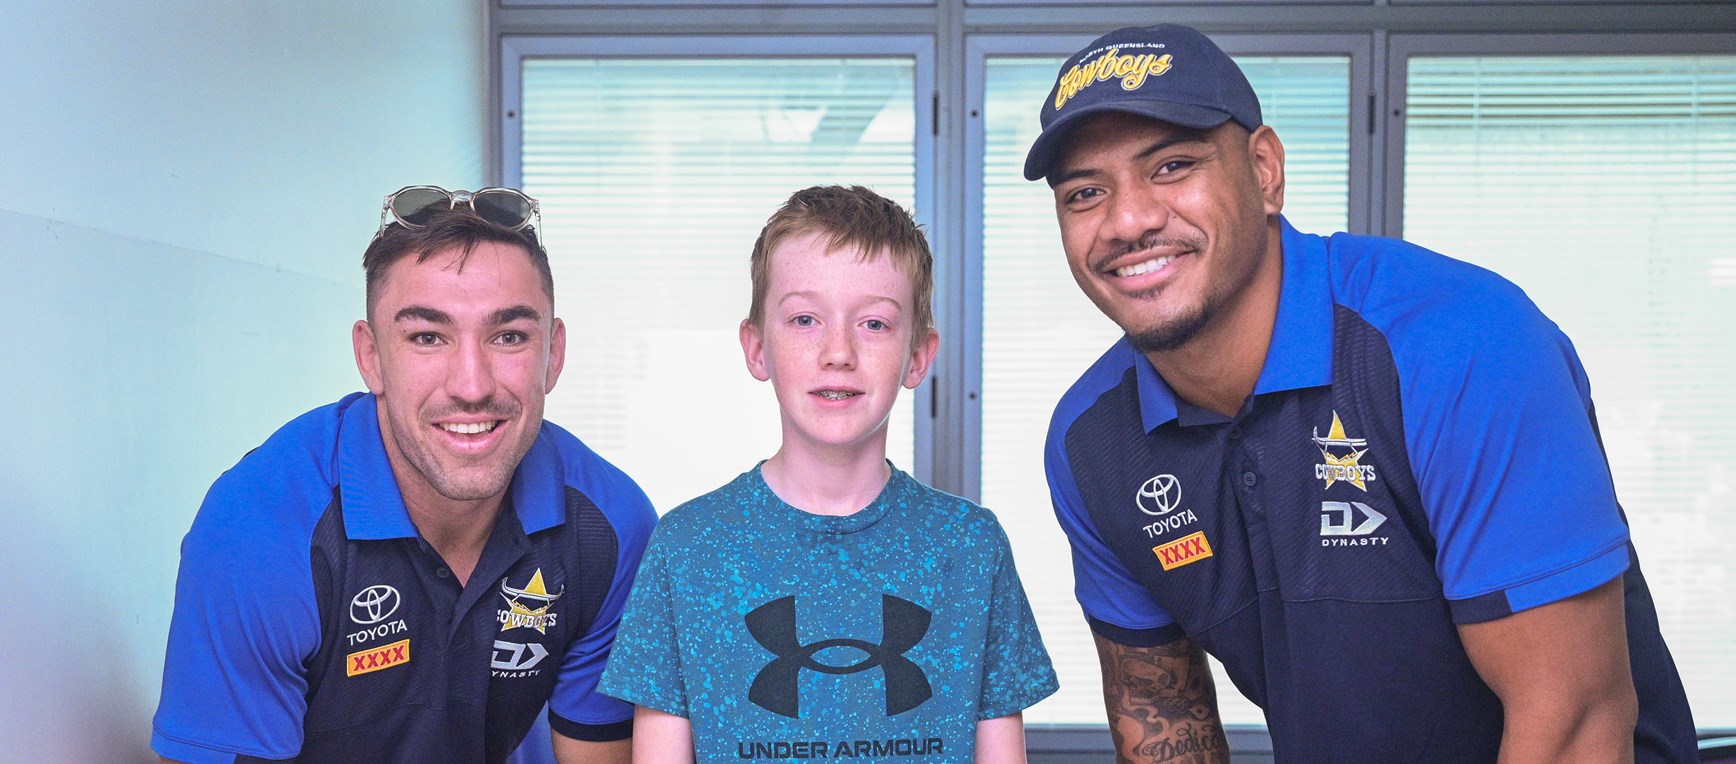 Mikaele and Robson spread some Cowboys Magic at Townsville Hospital